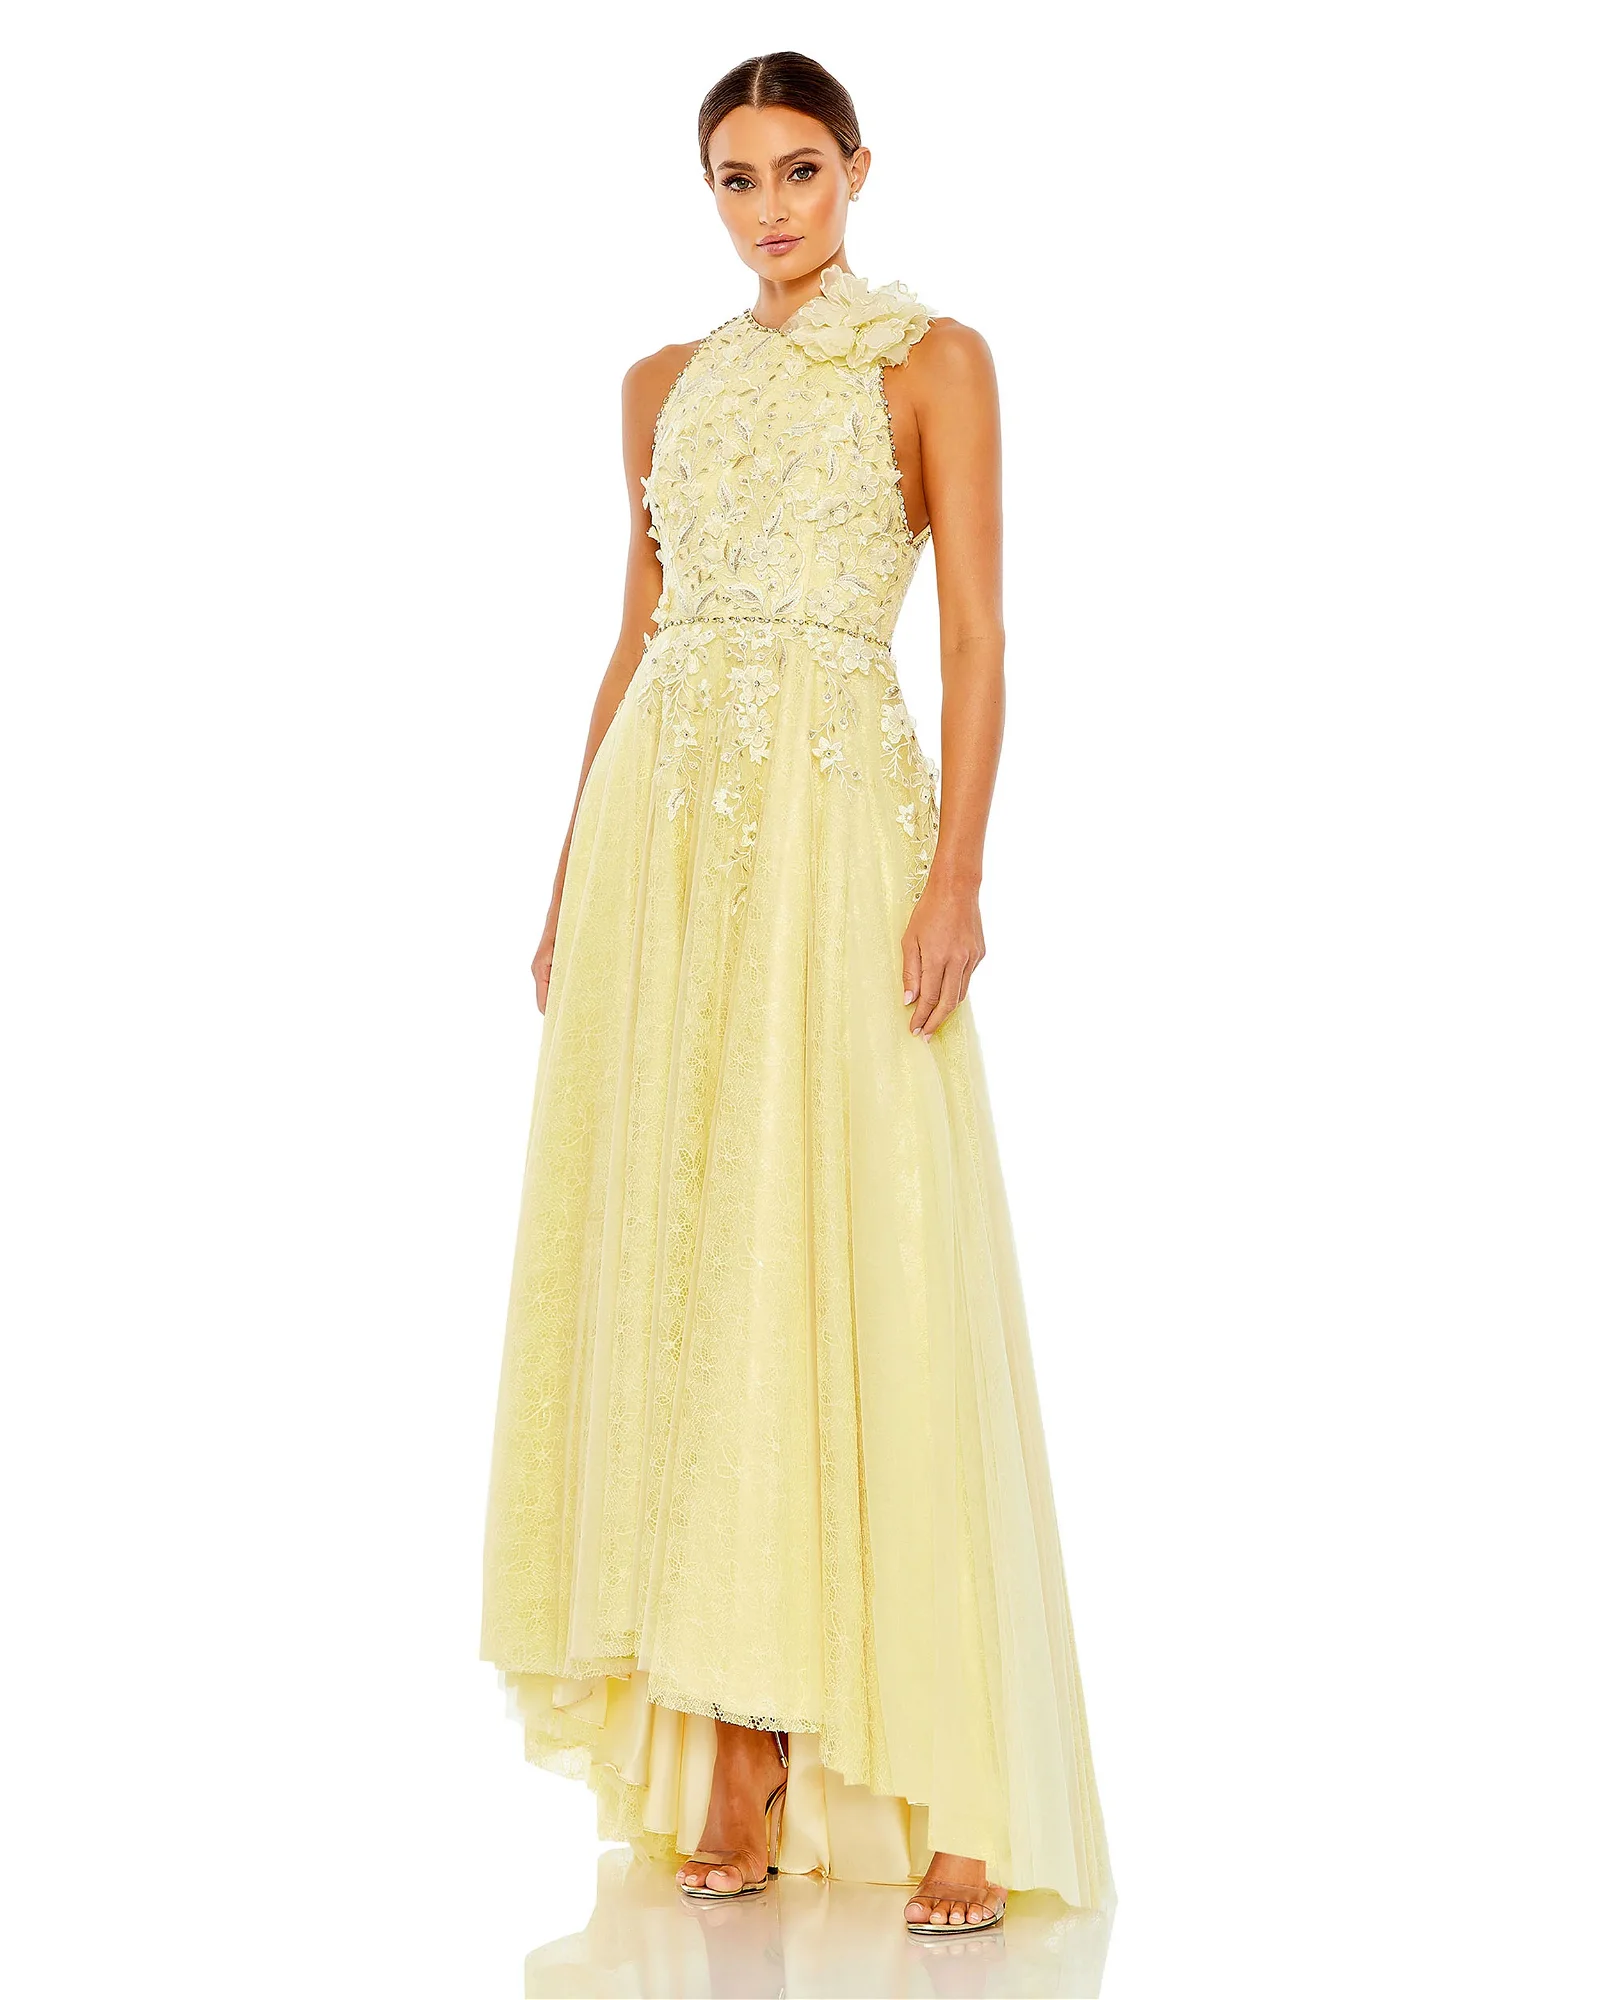 Image of Embellished High Neck Sleeveless A Line Gown